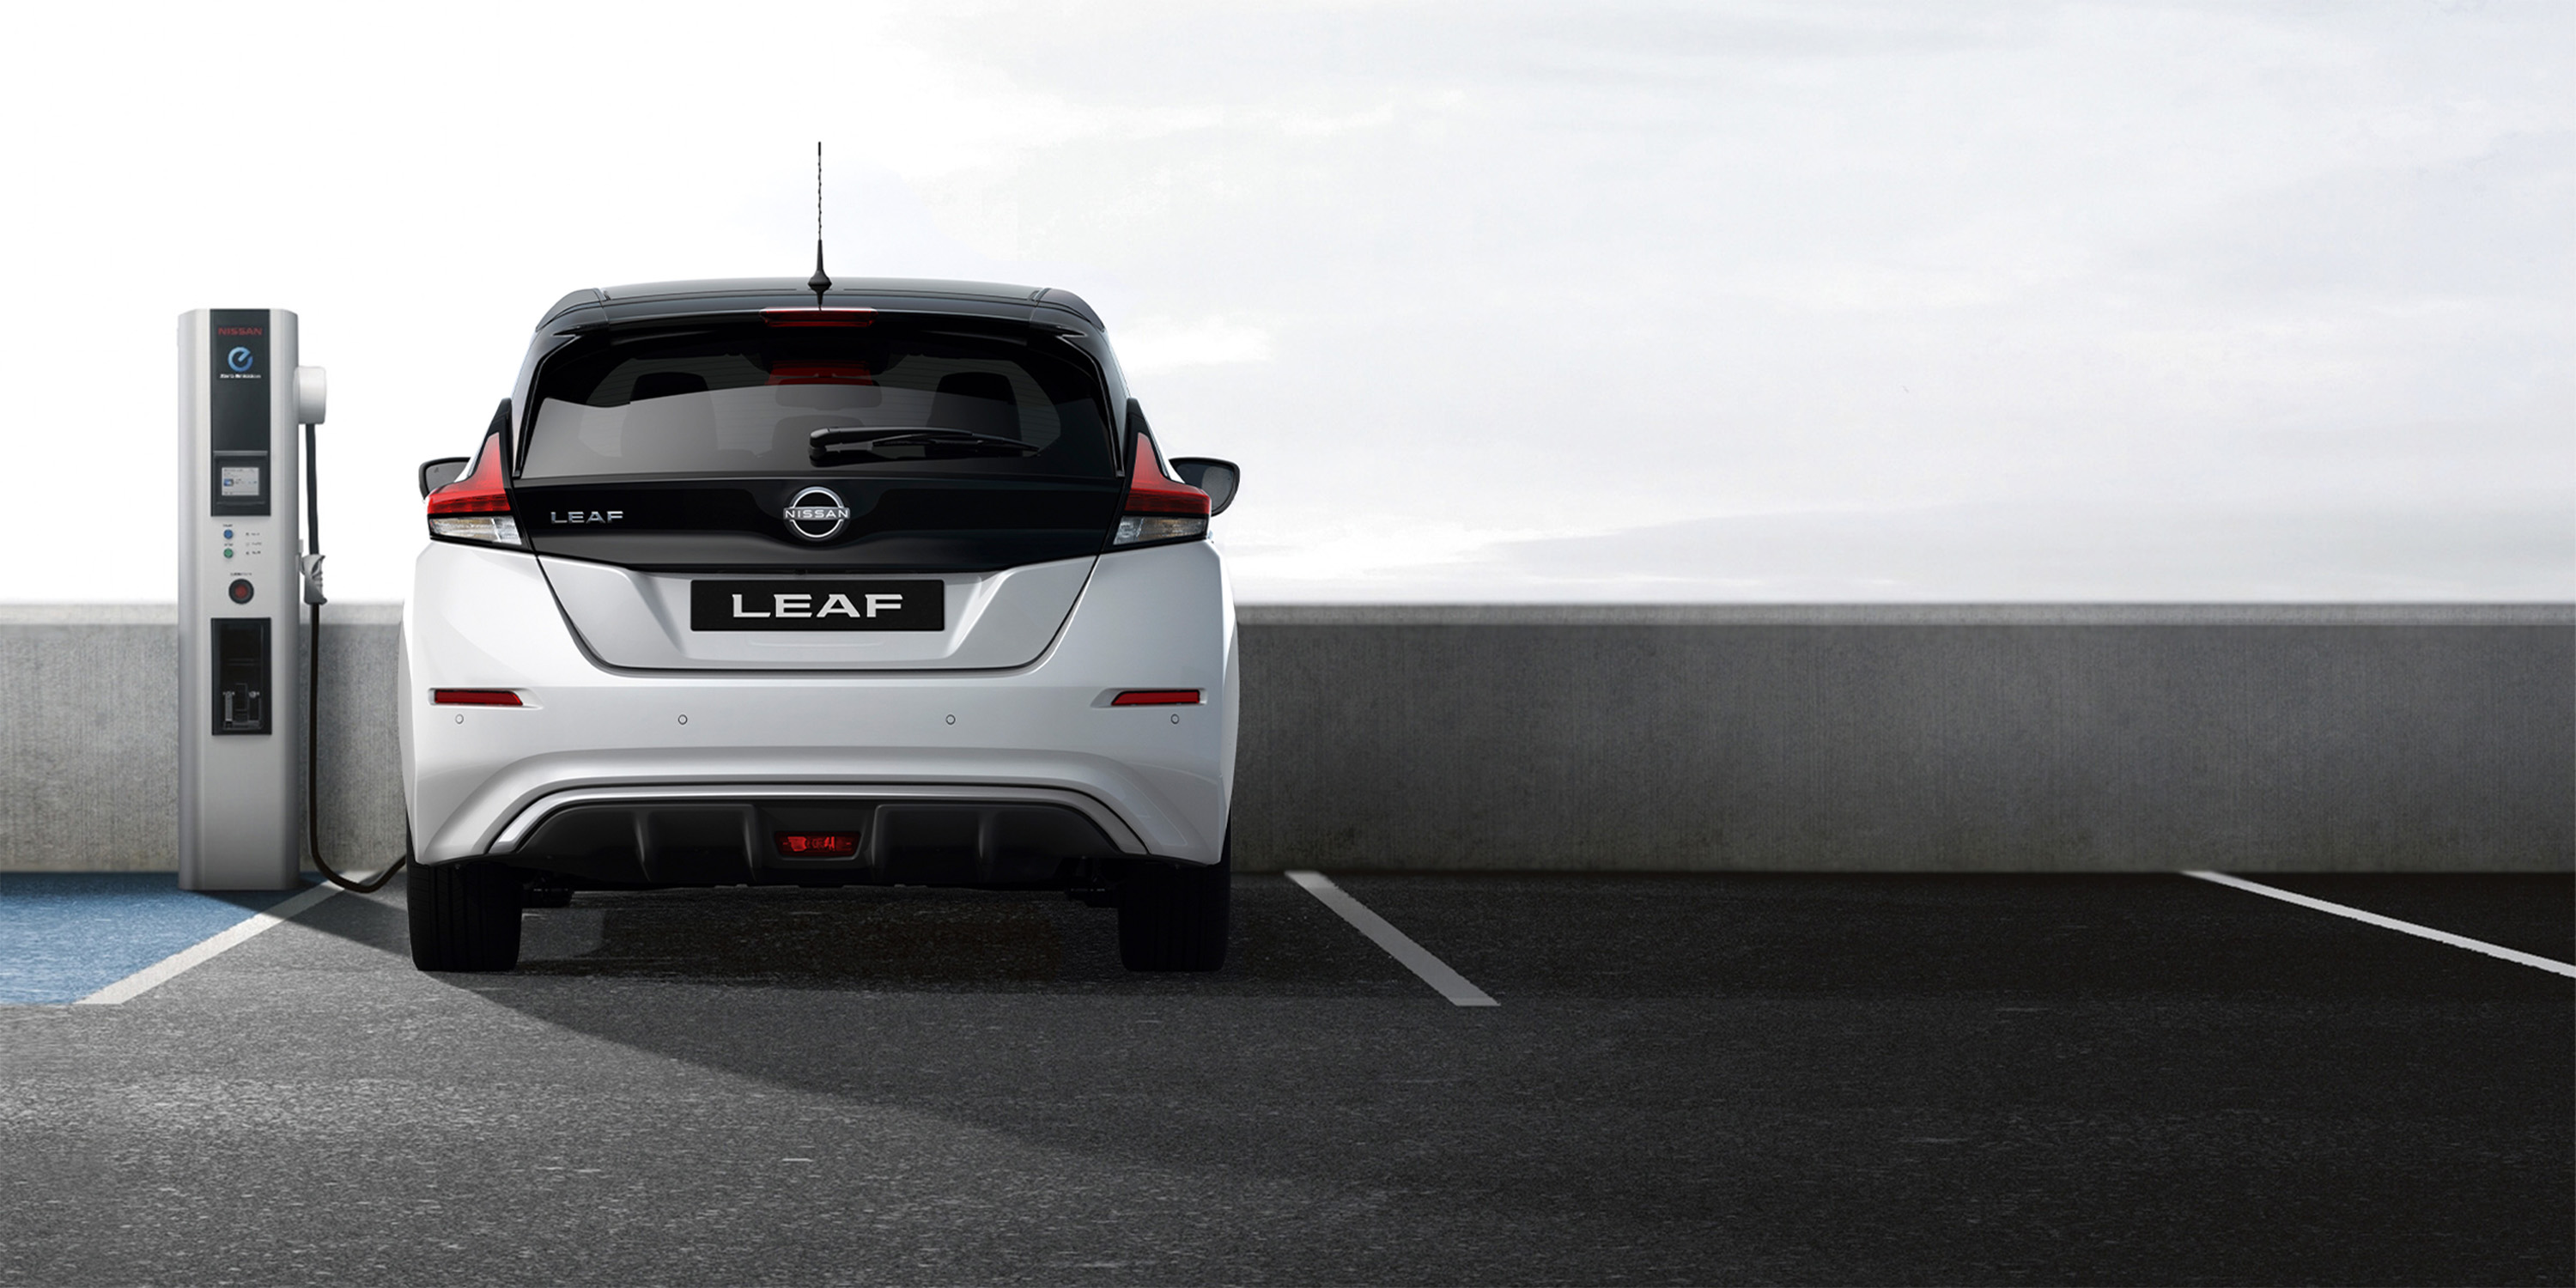 GO THE DISTANCE IN THE LEAF e+